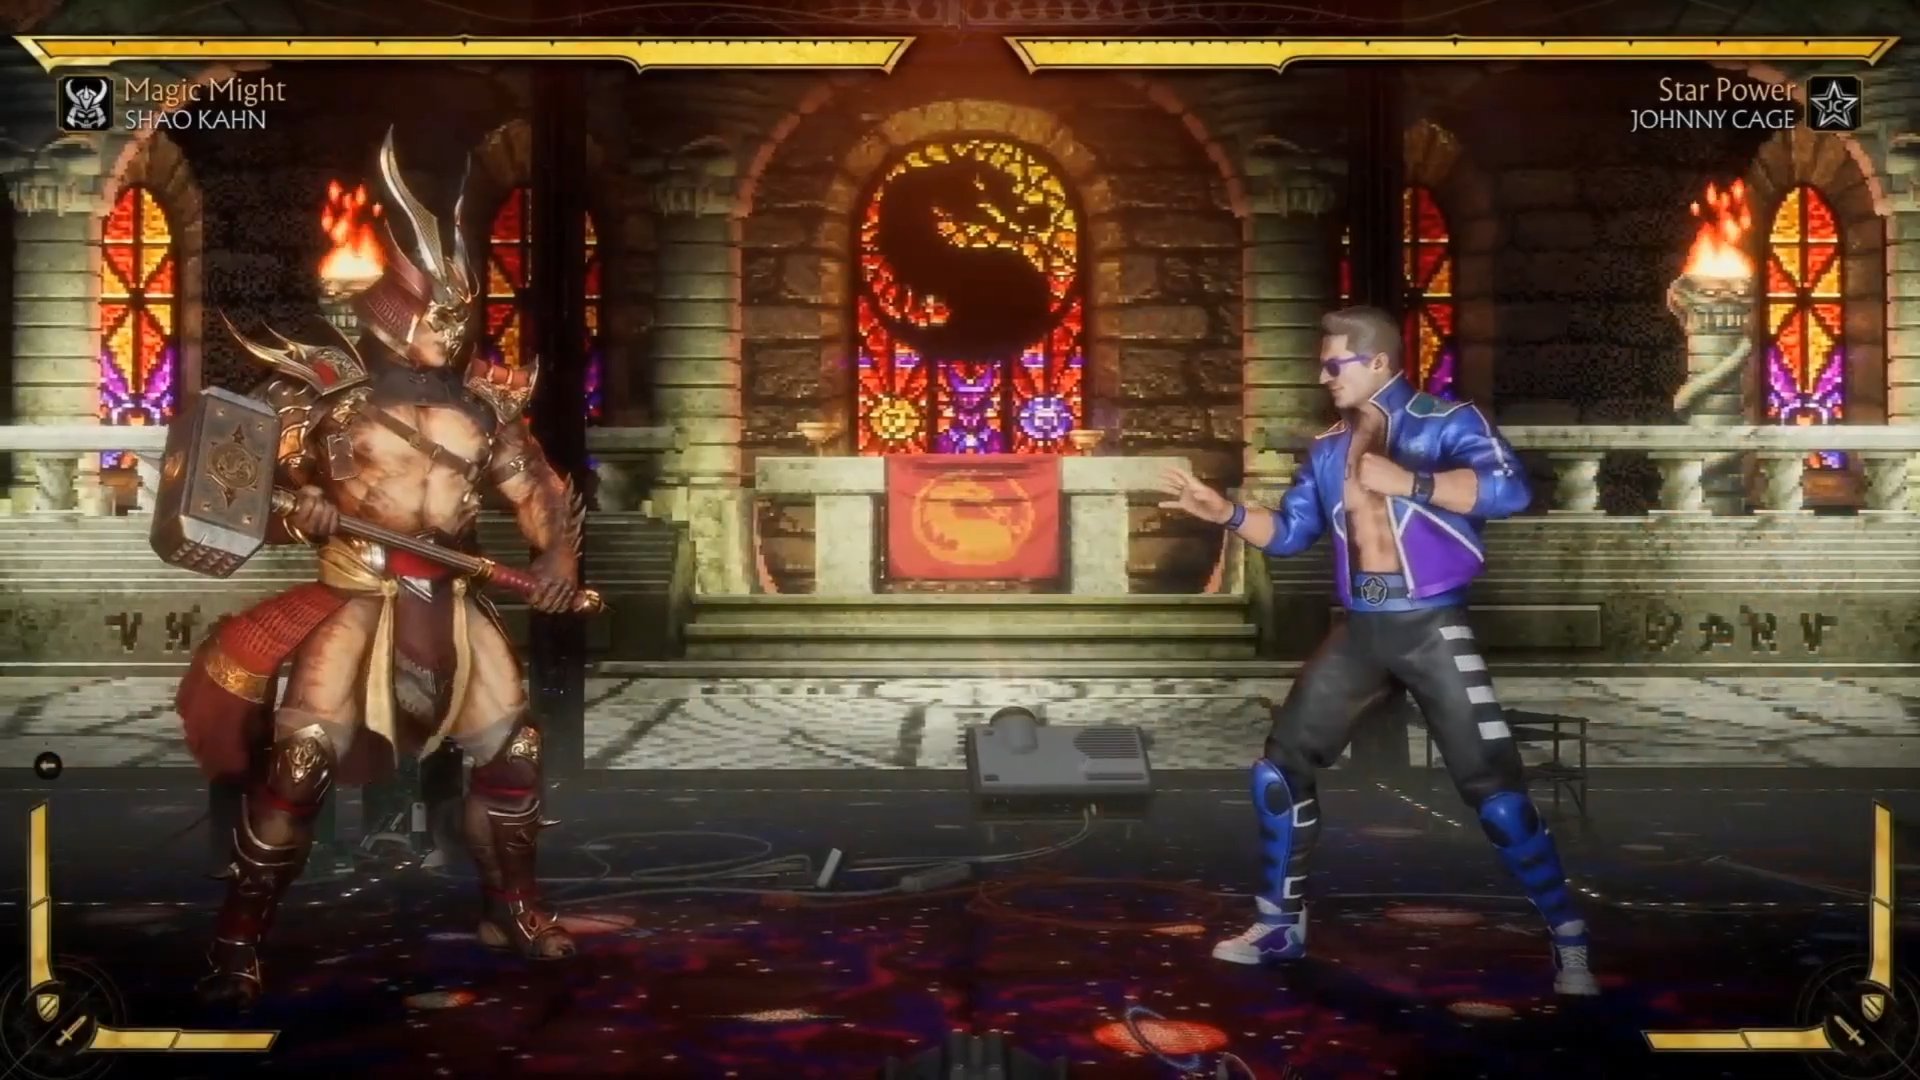 General Shao and Sindel get bloody in epic new Mortal Kombat 1 trailer